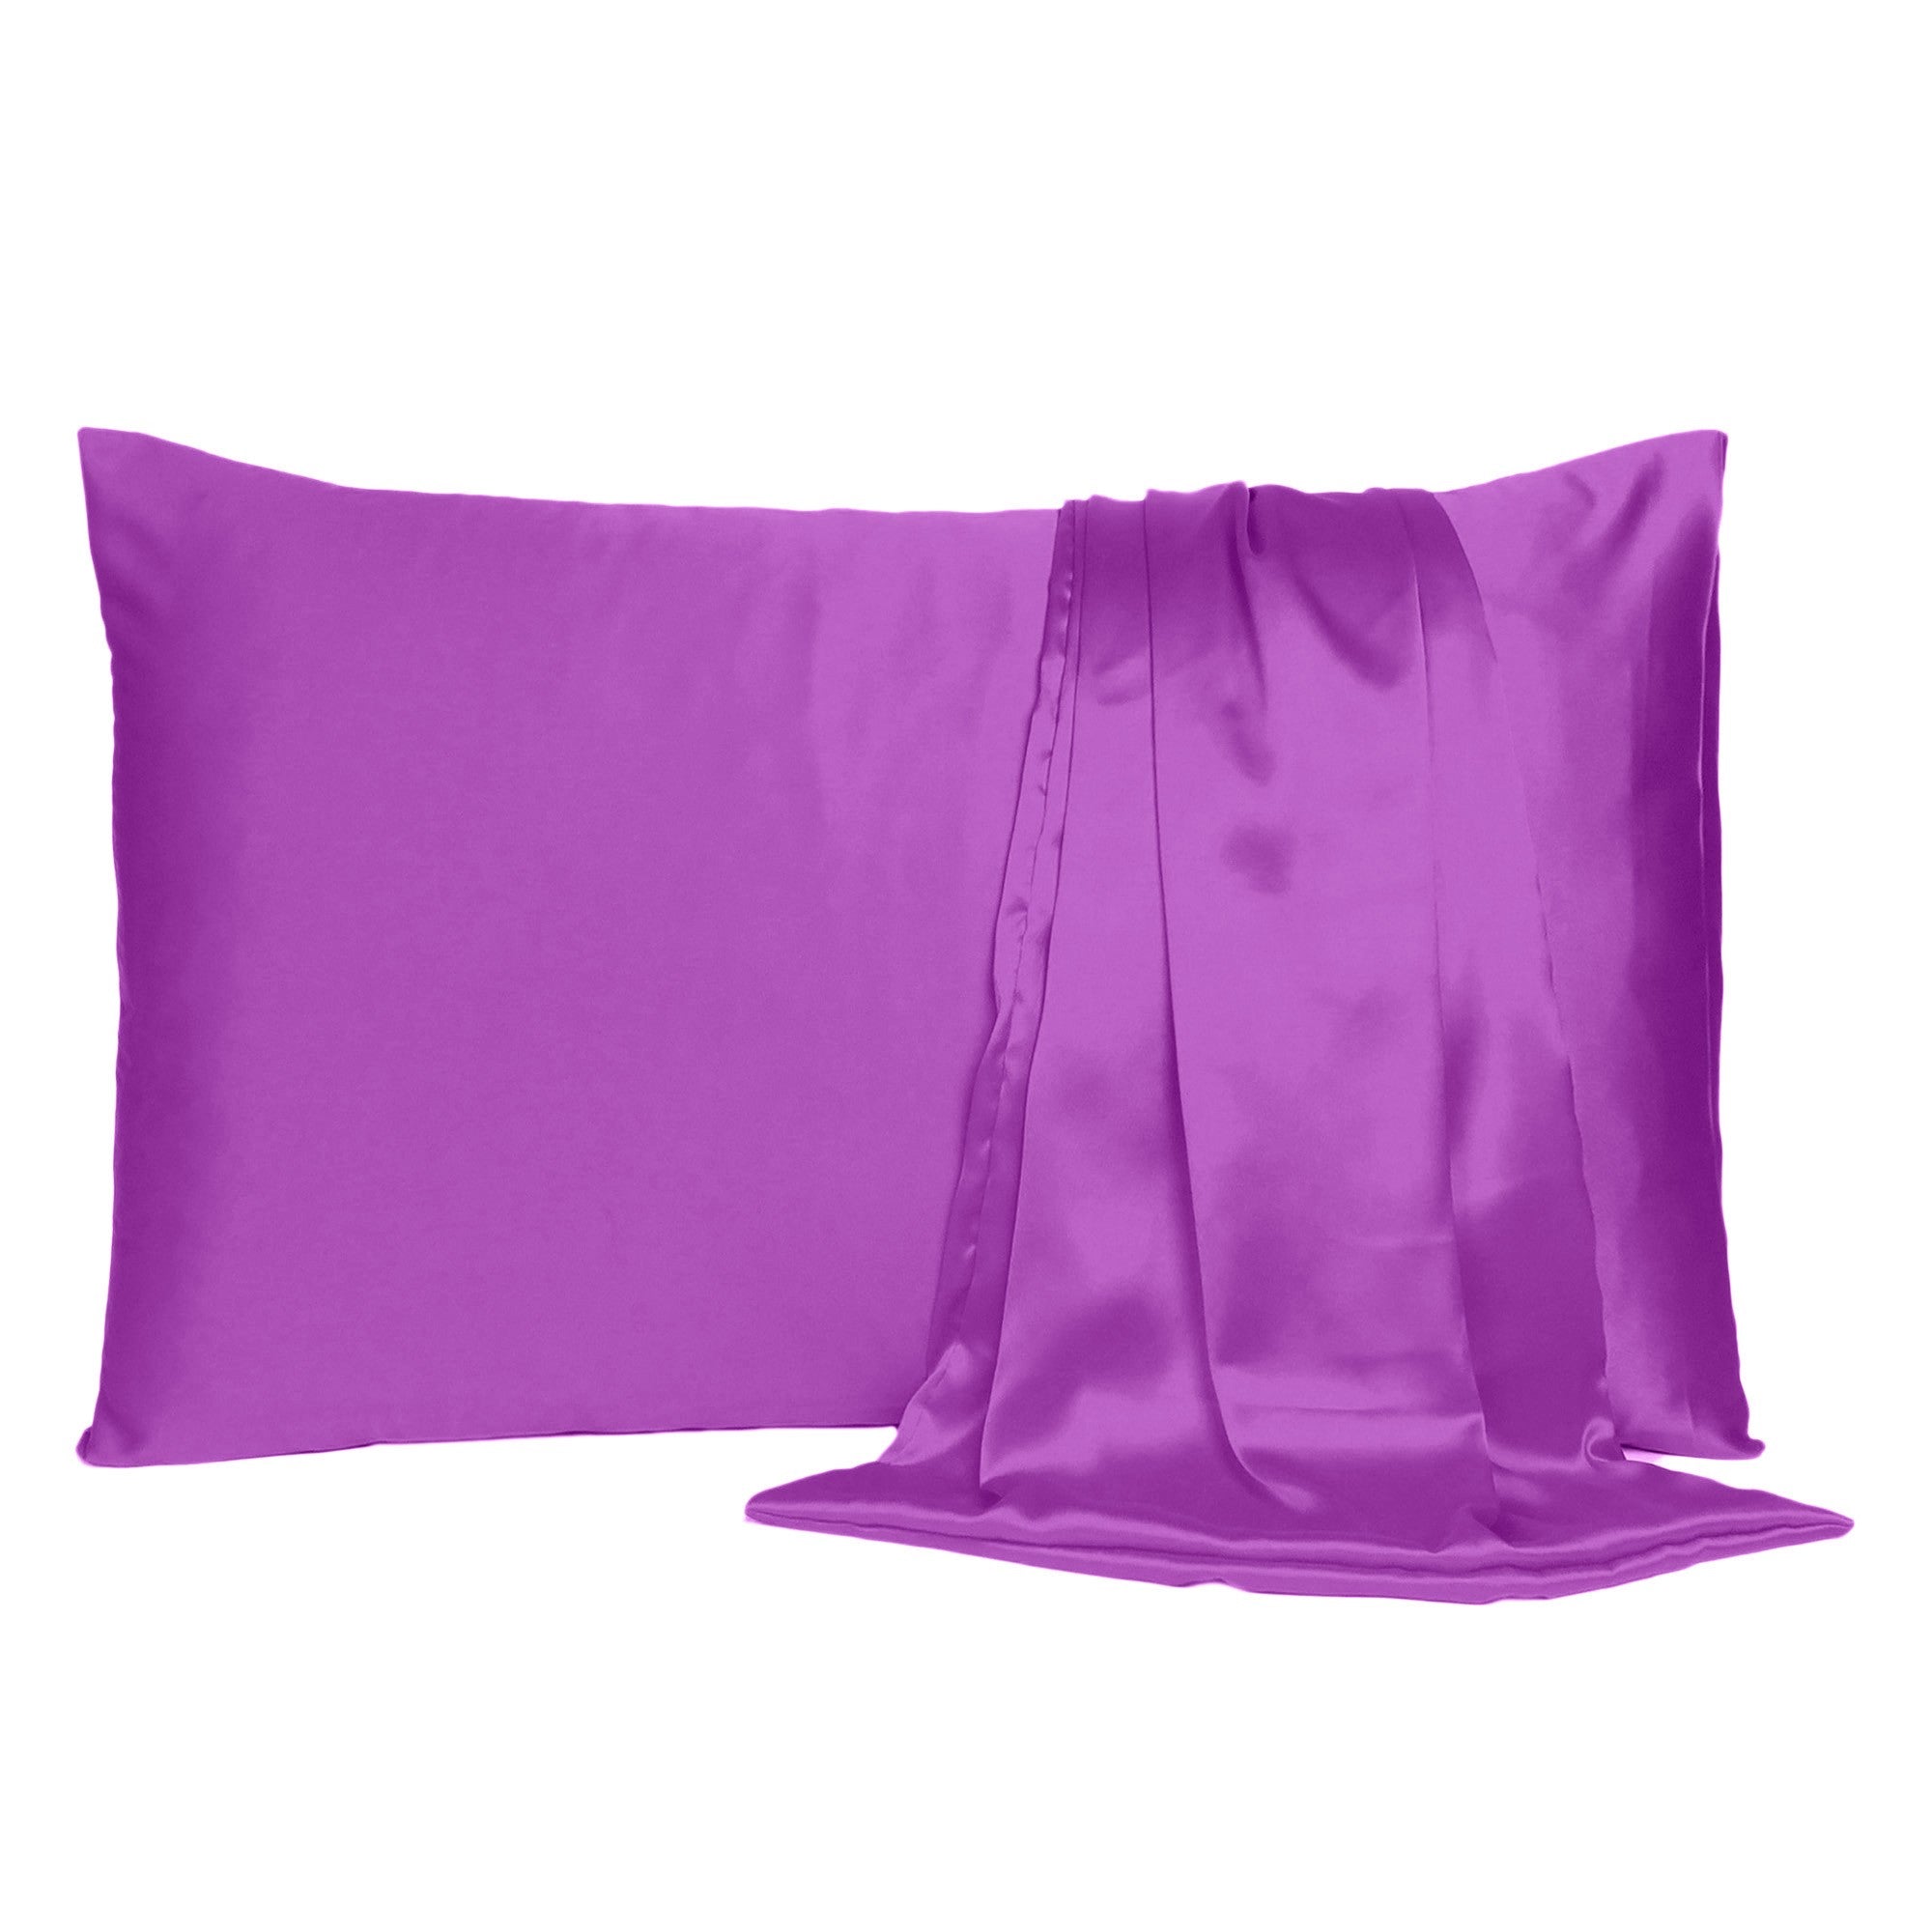 Purple Merlot Dreamy Set Of 2 Silky Satin Queen Pillowcases - Tuesday Morning-Bed Sheets